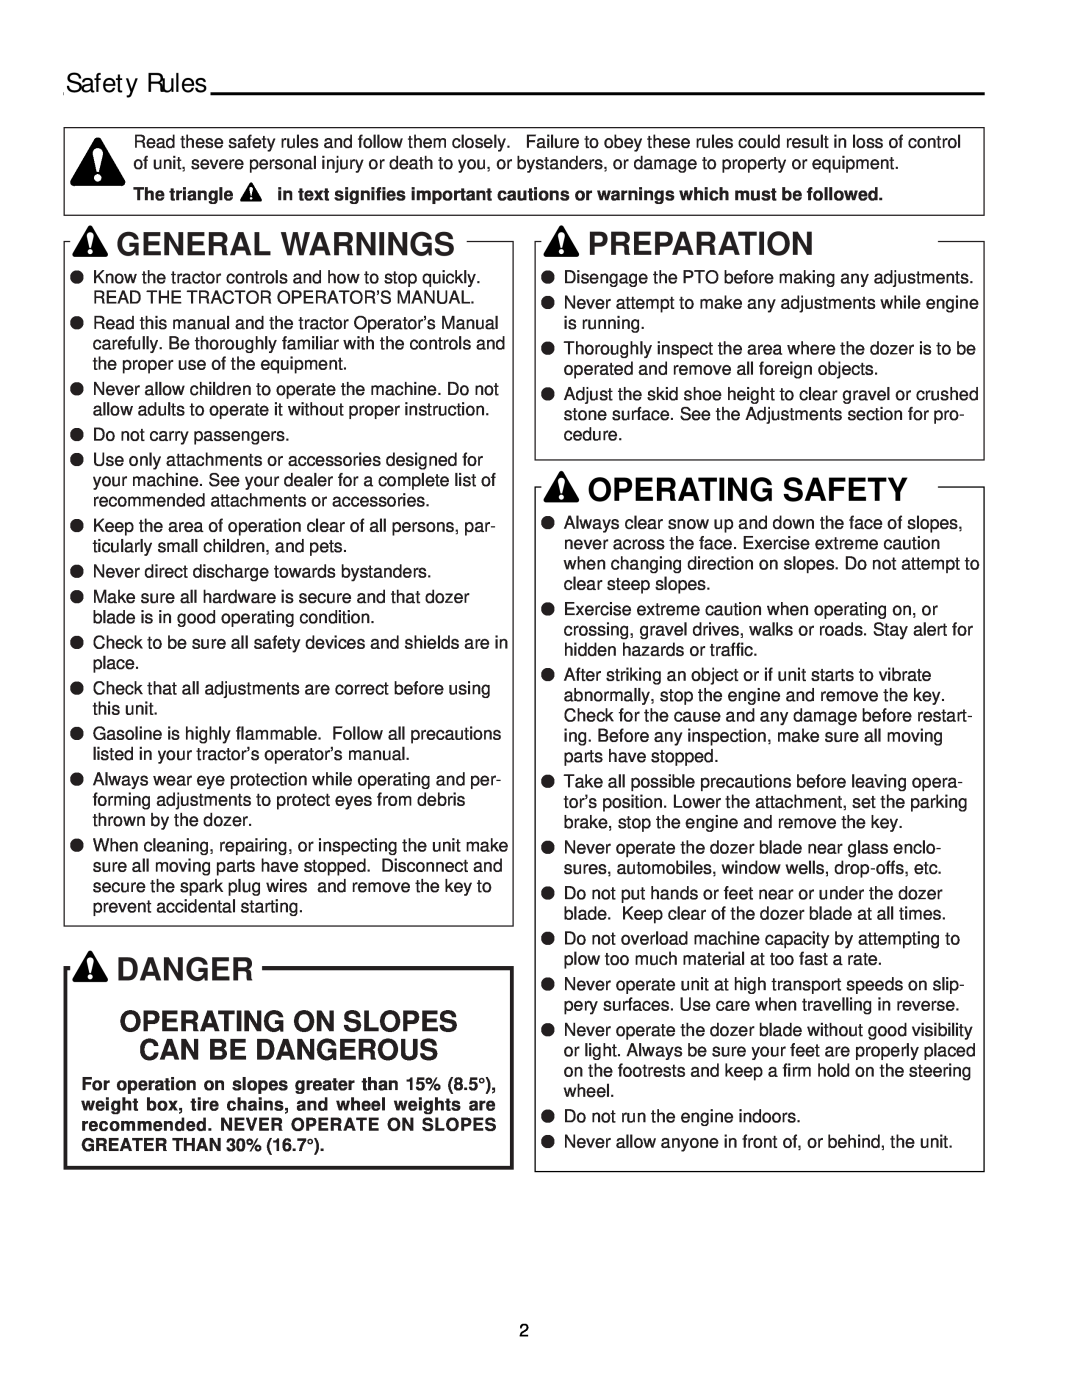 Snapper 2137 manual Safety Rules, General Warnings, Preparation, Operating Safety, Operating On Slopes Can Be Dangerous 